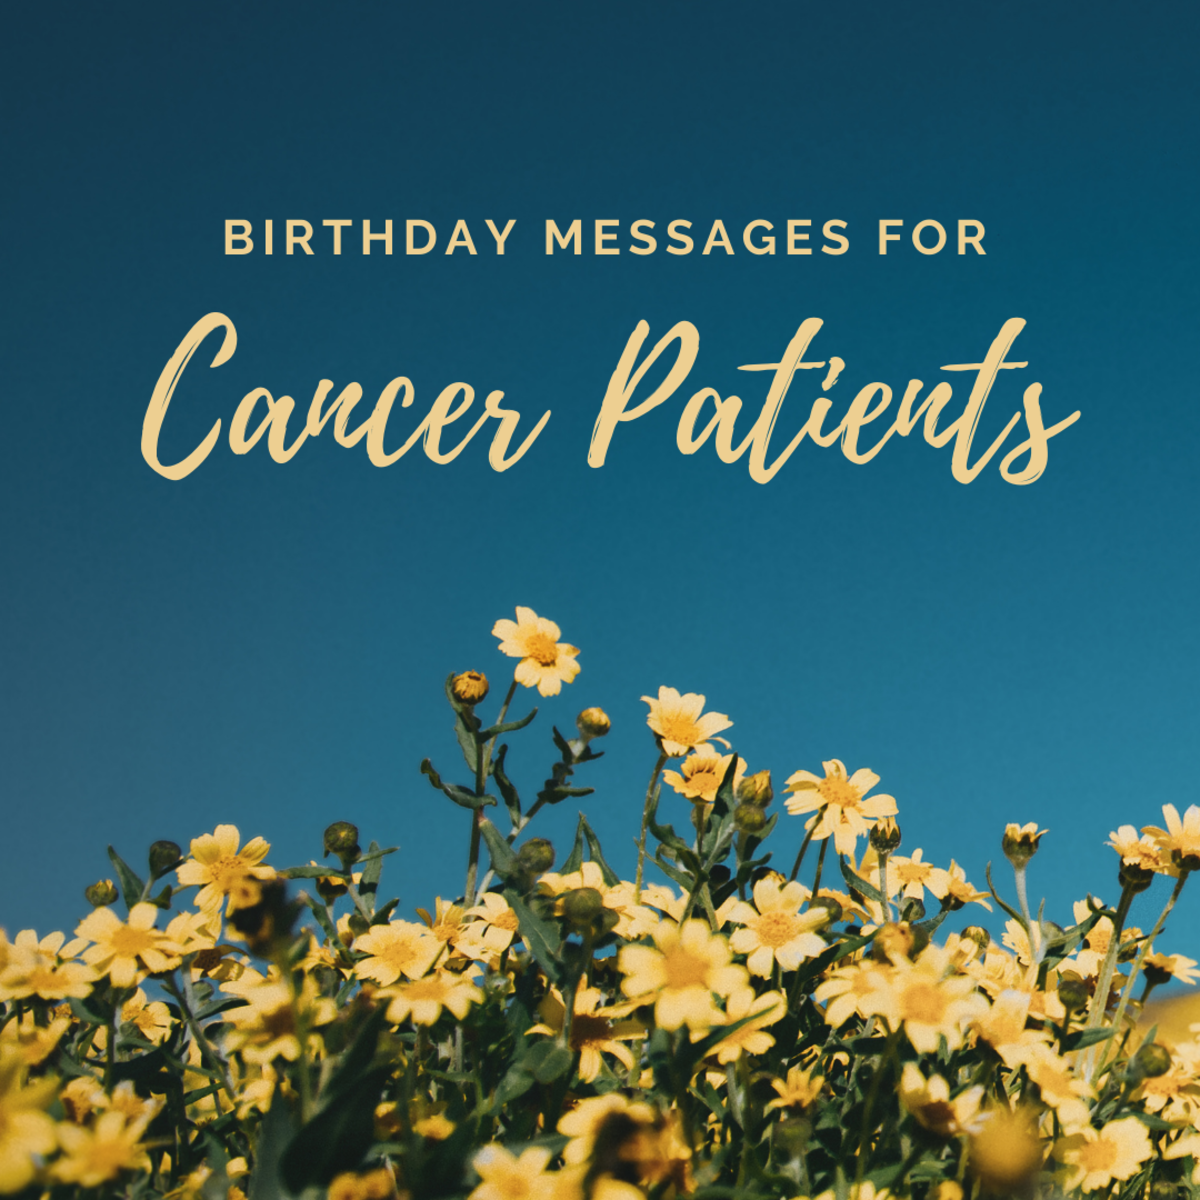 Finding the right words to wish someone with cancer a happy birthday can be challenging. Here are some examples and ideas to help inspire you.